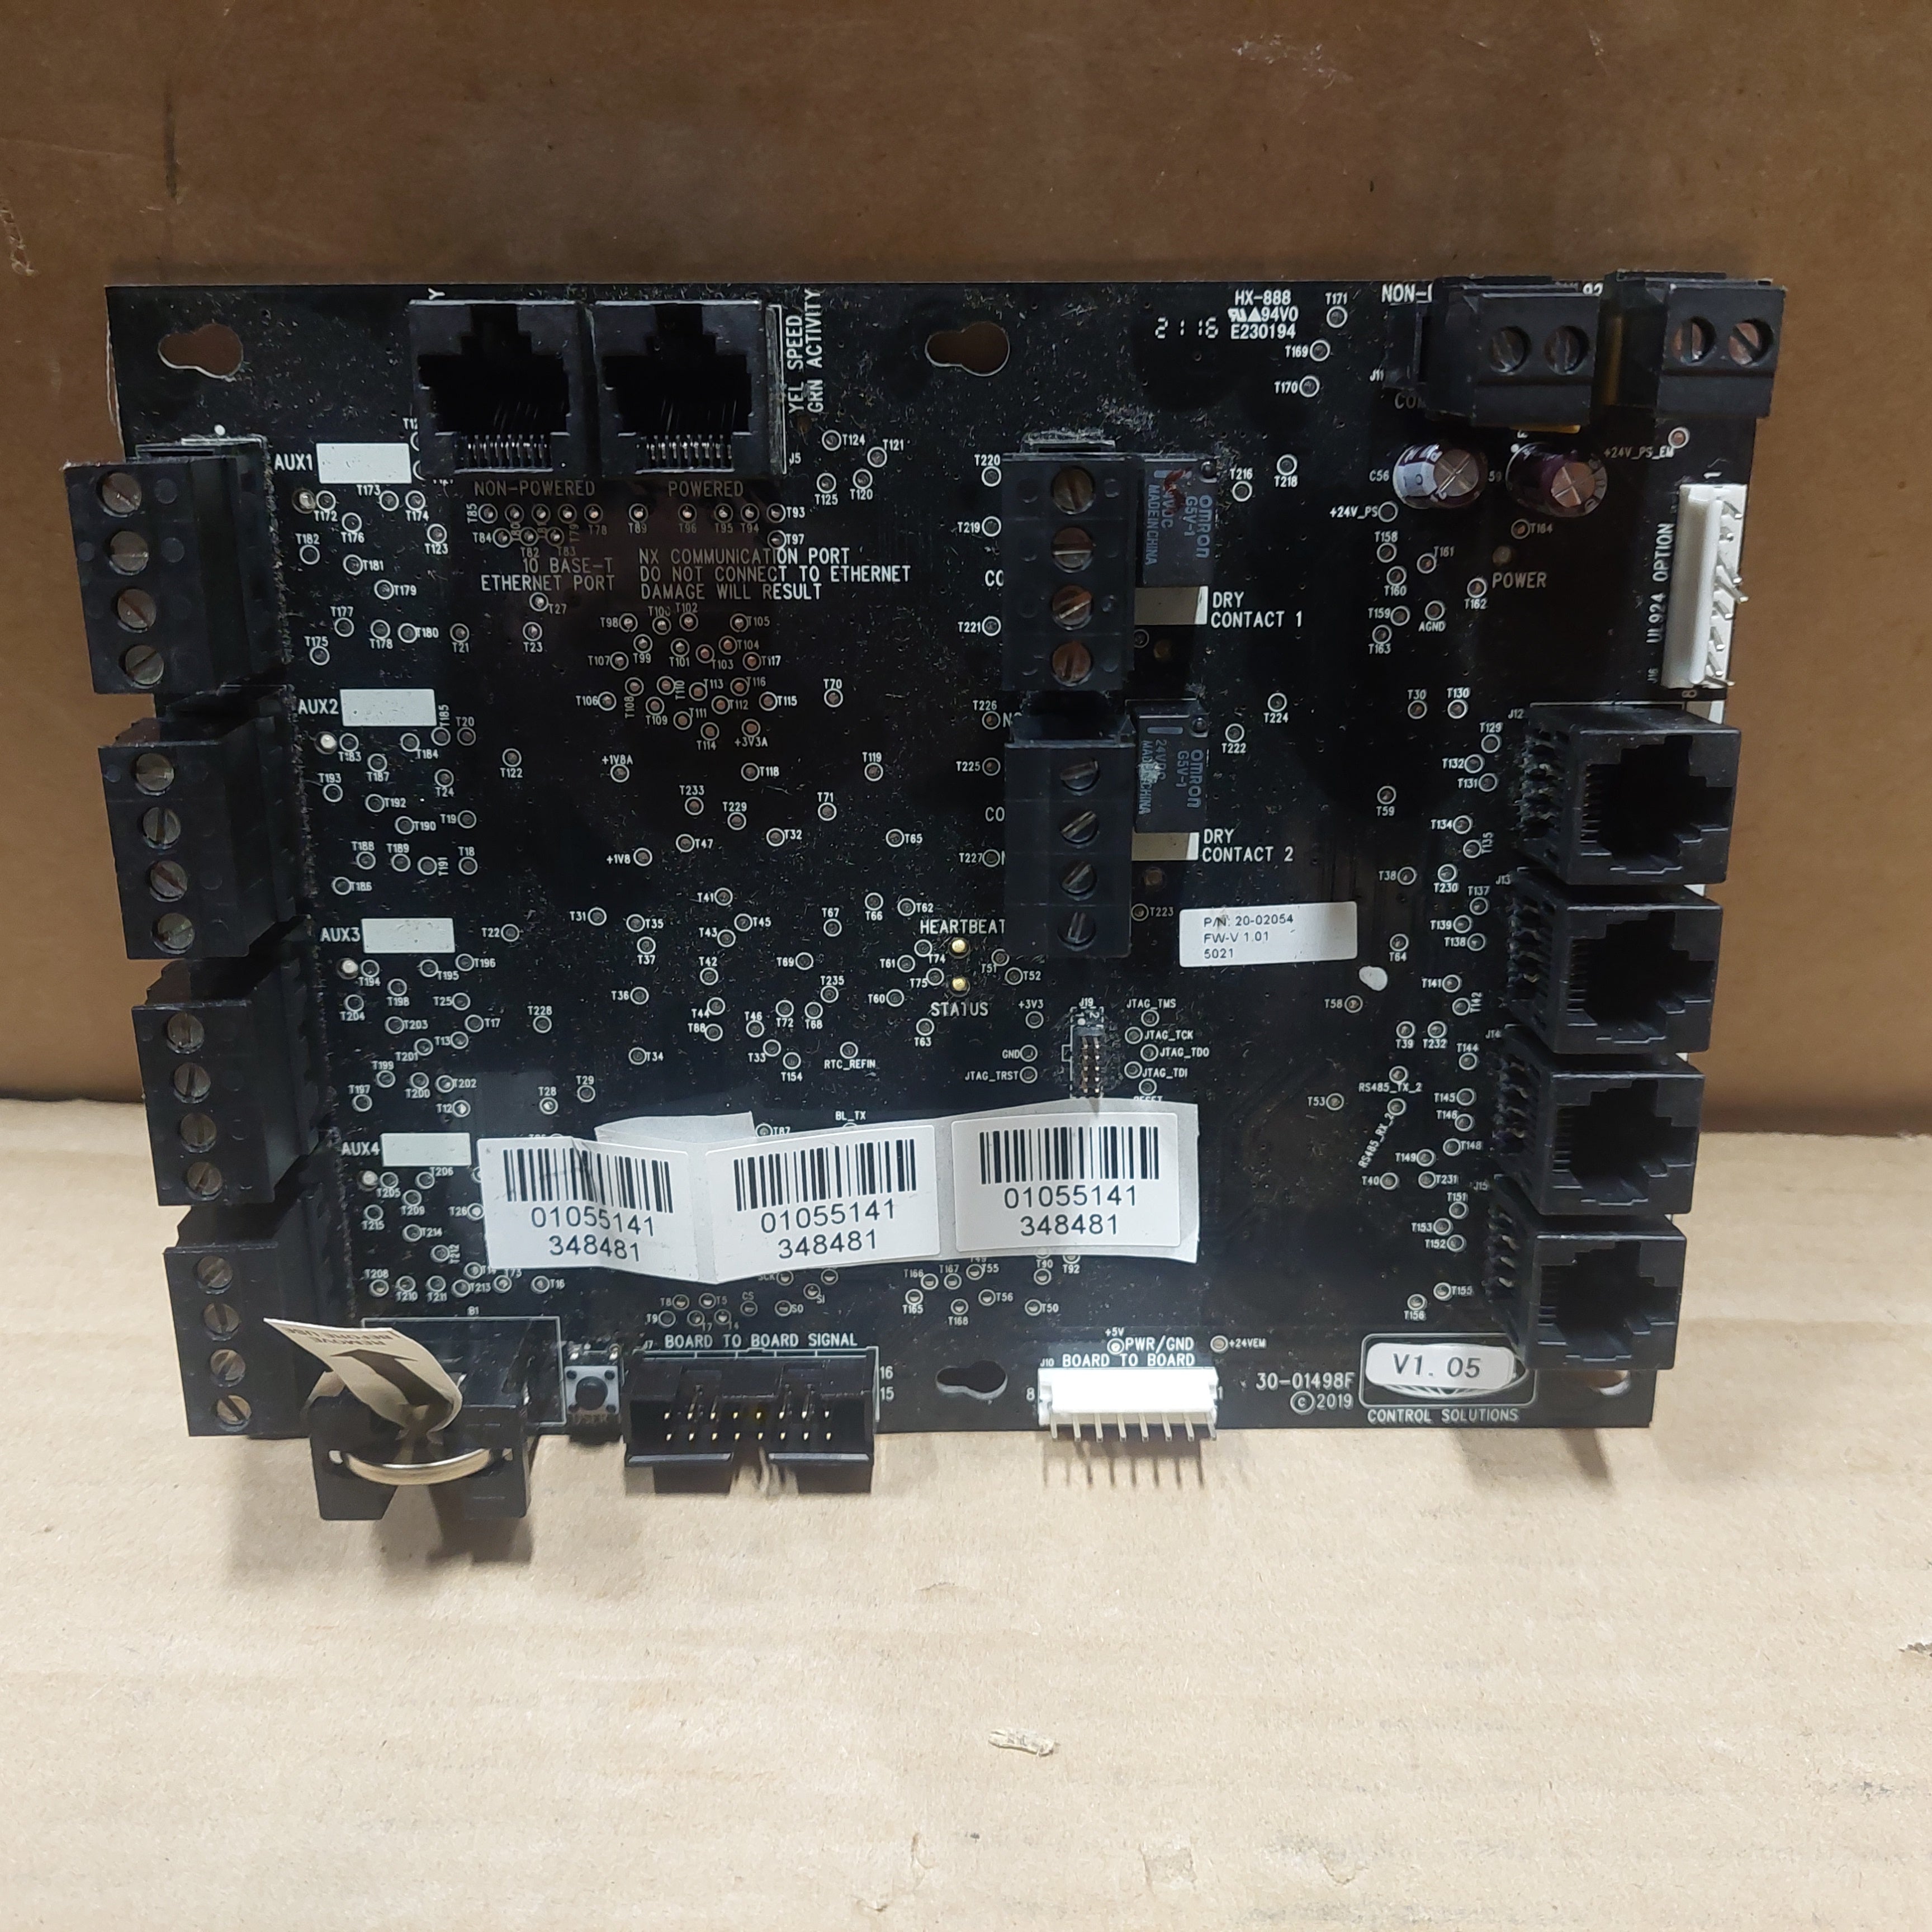 Hubbell 20-02054 NXP2 Controller Board FW-V 1.01 New